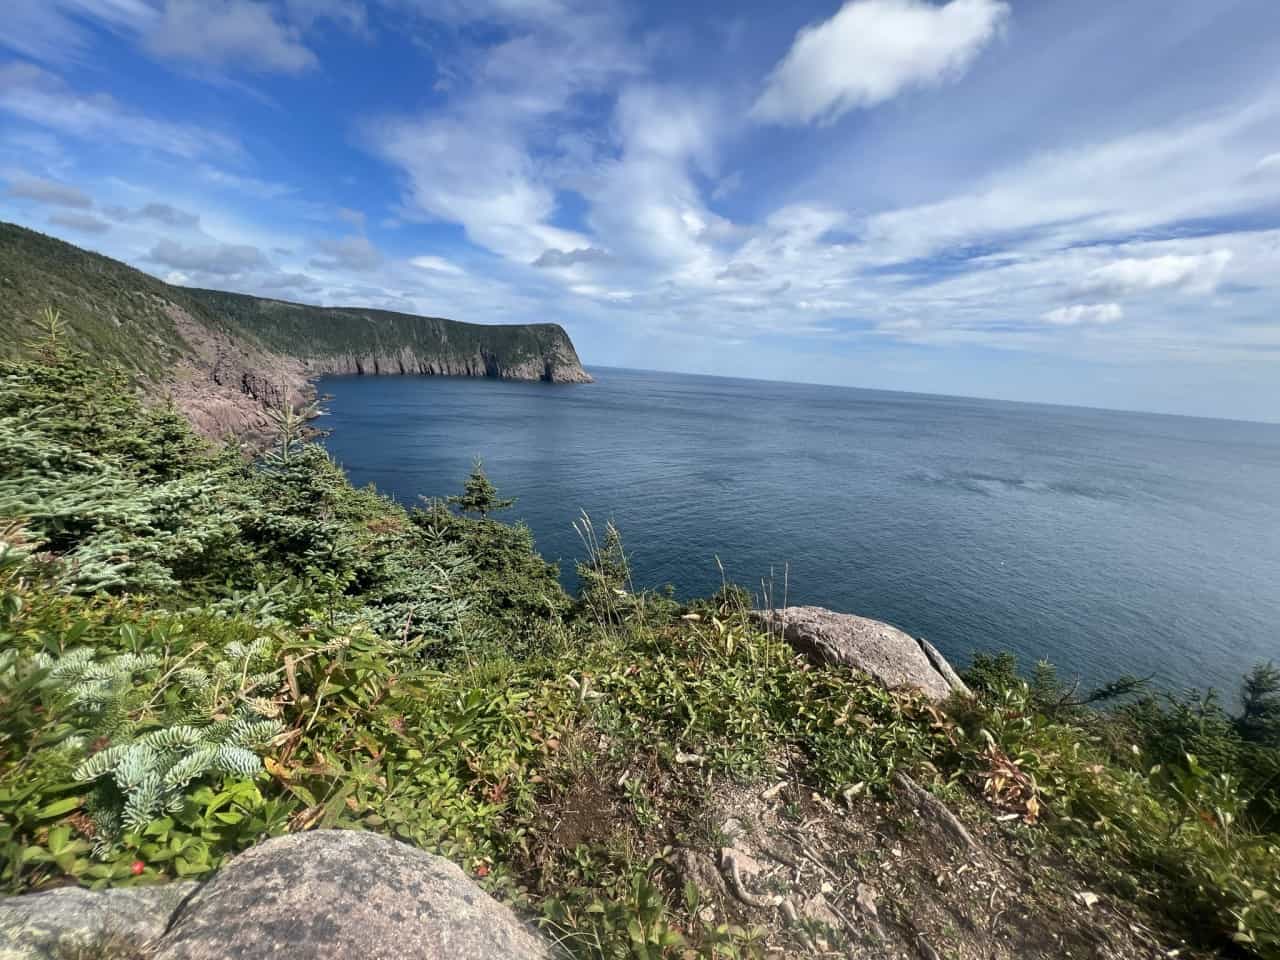 Sugar Loaf Path, East Coast Trail, St. John's, Newfoundland - The breathtaking views along the coastal trail. The skyline and Atlantic Ocean glisten in the sunshine. A great location for a picnic, bird watching or waiting to see whales who visit here each summer.  